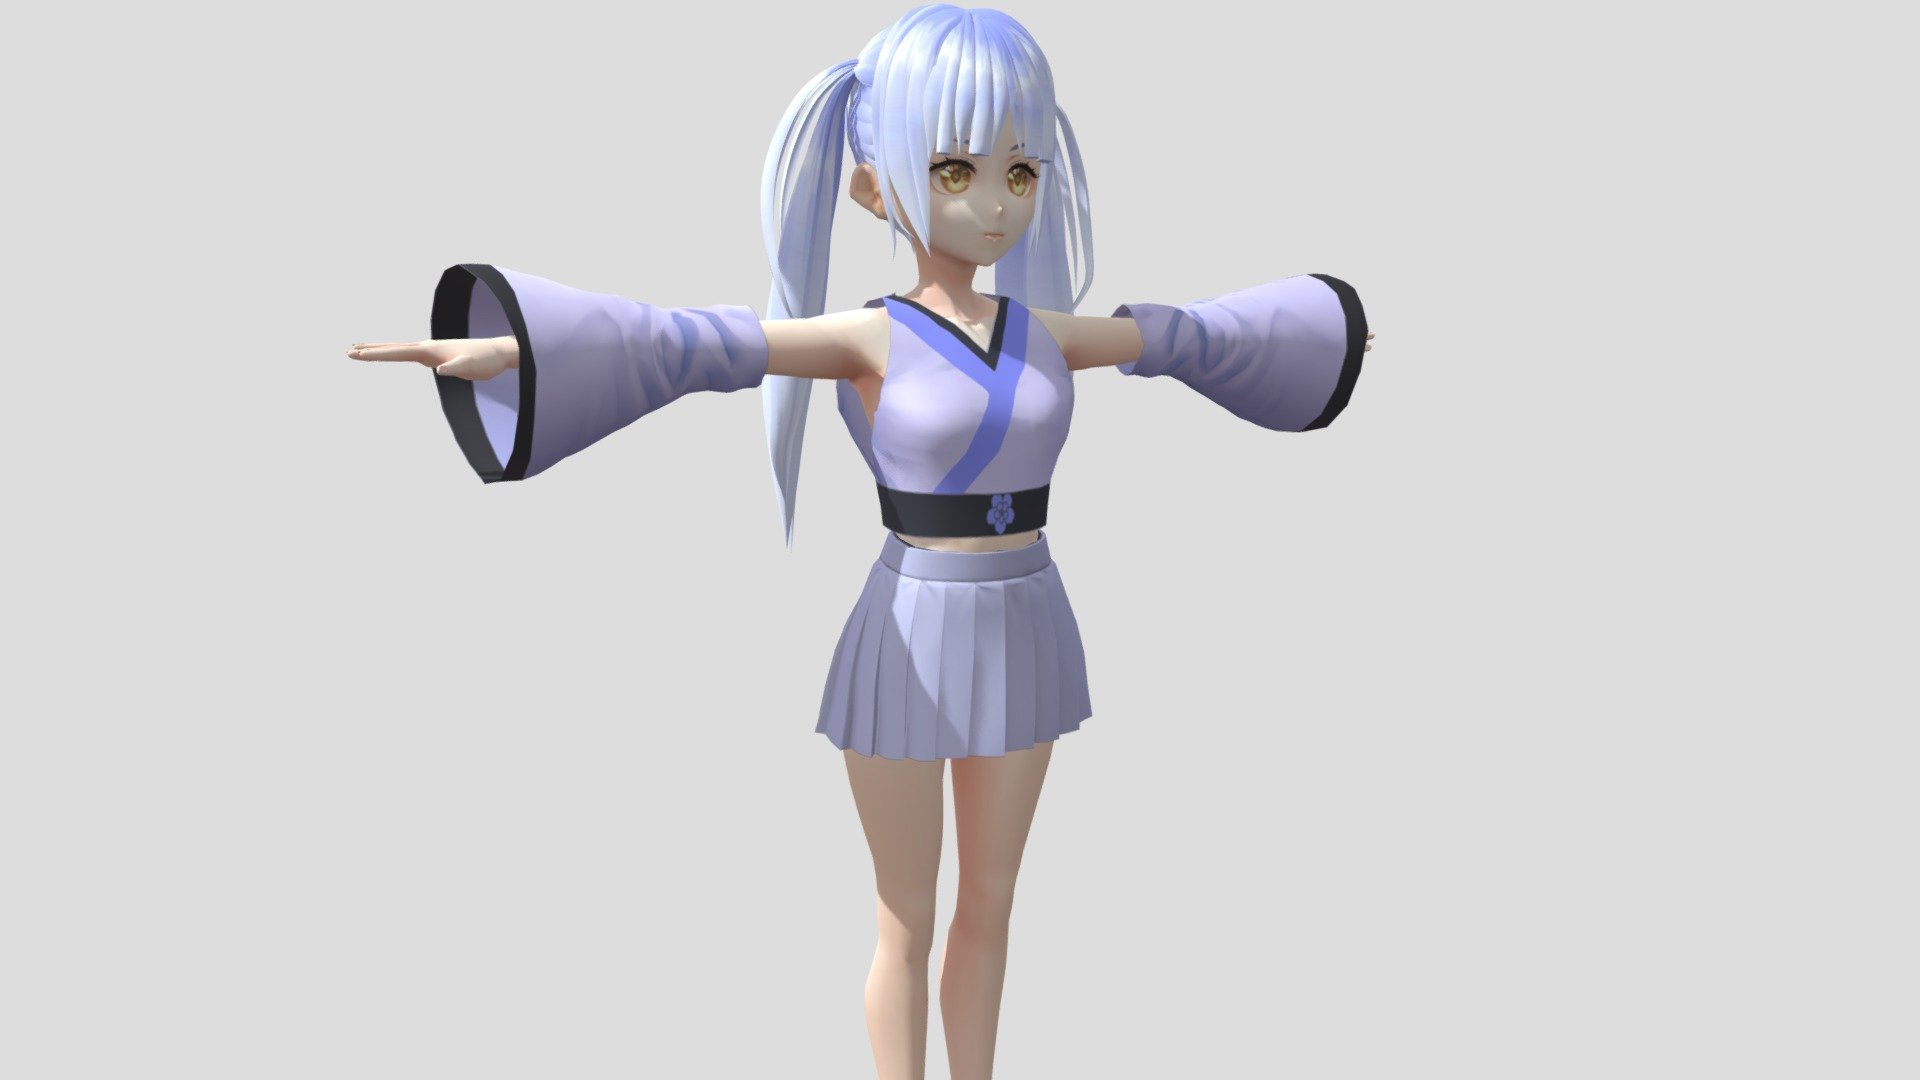 Model preview



This character model belongs to Japanese anime style, all models has been converted into fbx file using blender, users can add their favorite animations on mixamo website, then apply to unity versions above 2019



Character : Suzuran

Verts:20765

Tris:29522

Fourteen textures for the character



This package contains VRM files, which can make the character module more refined, please refer to the manual for details



▶Commercial use allowed

▶Forbid secondary sales



Welcome add my website to credit :

Sketchfab

Pixiv

VRoidHub
 - 【Anime Character / alex94i60】Suzuran - Buy Royalty Free 3D model by 3D動漫風角色屋 / 3D Anime Character Store (@alex94i60) 3d model